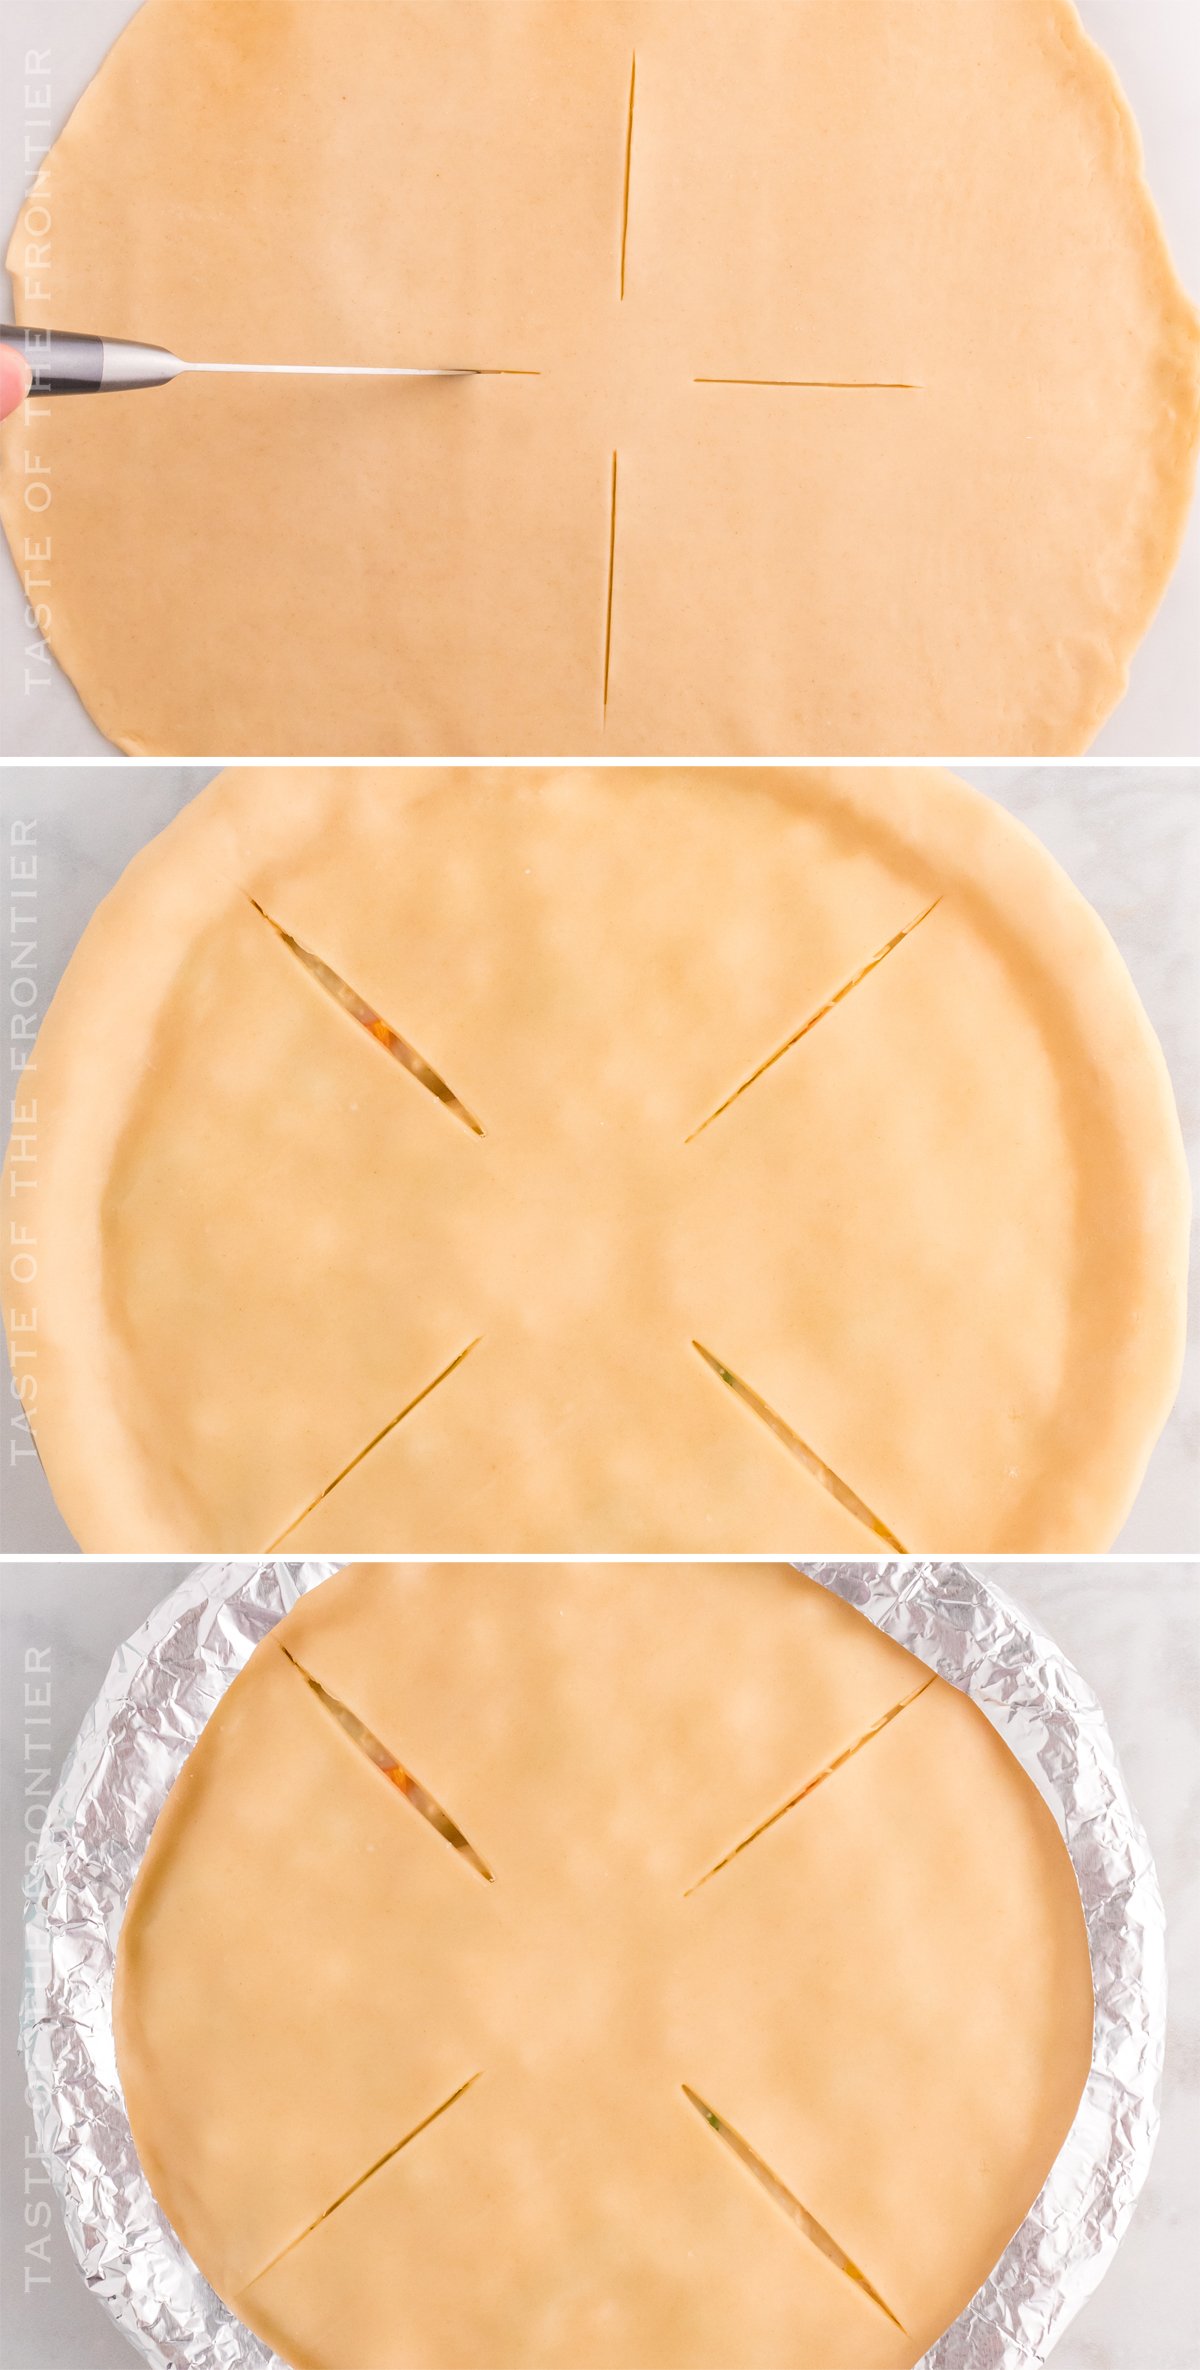 how to make crust